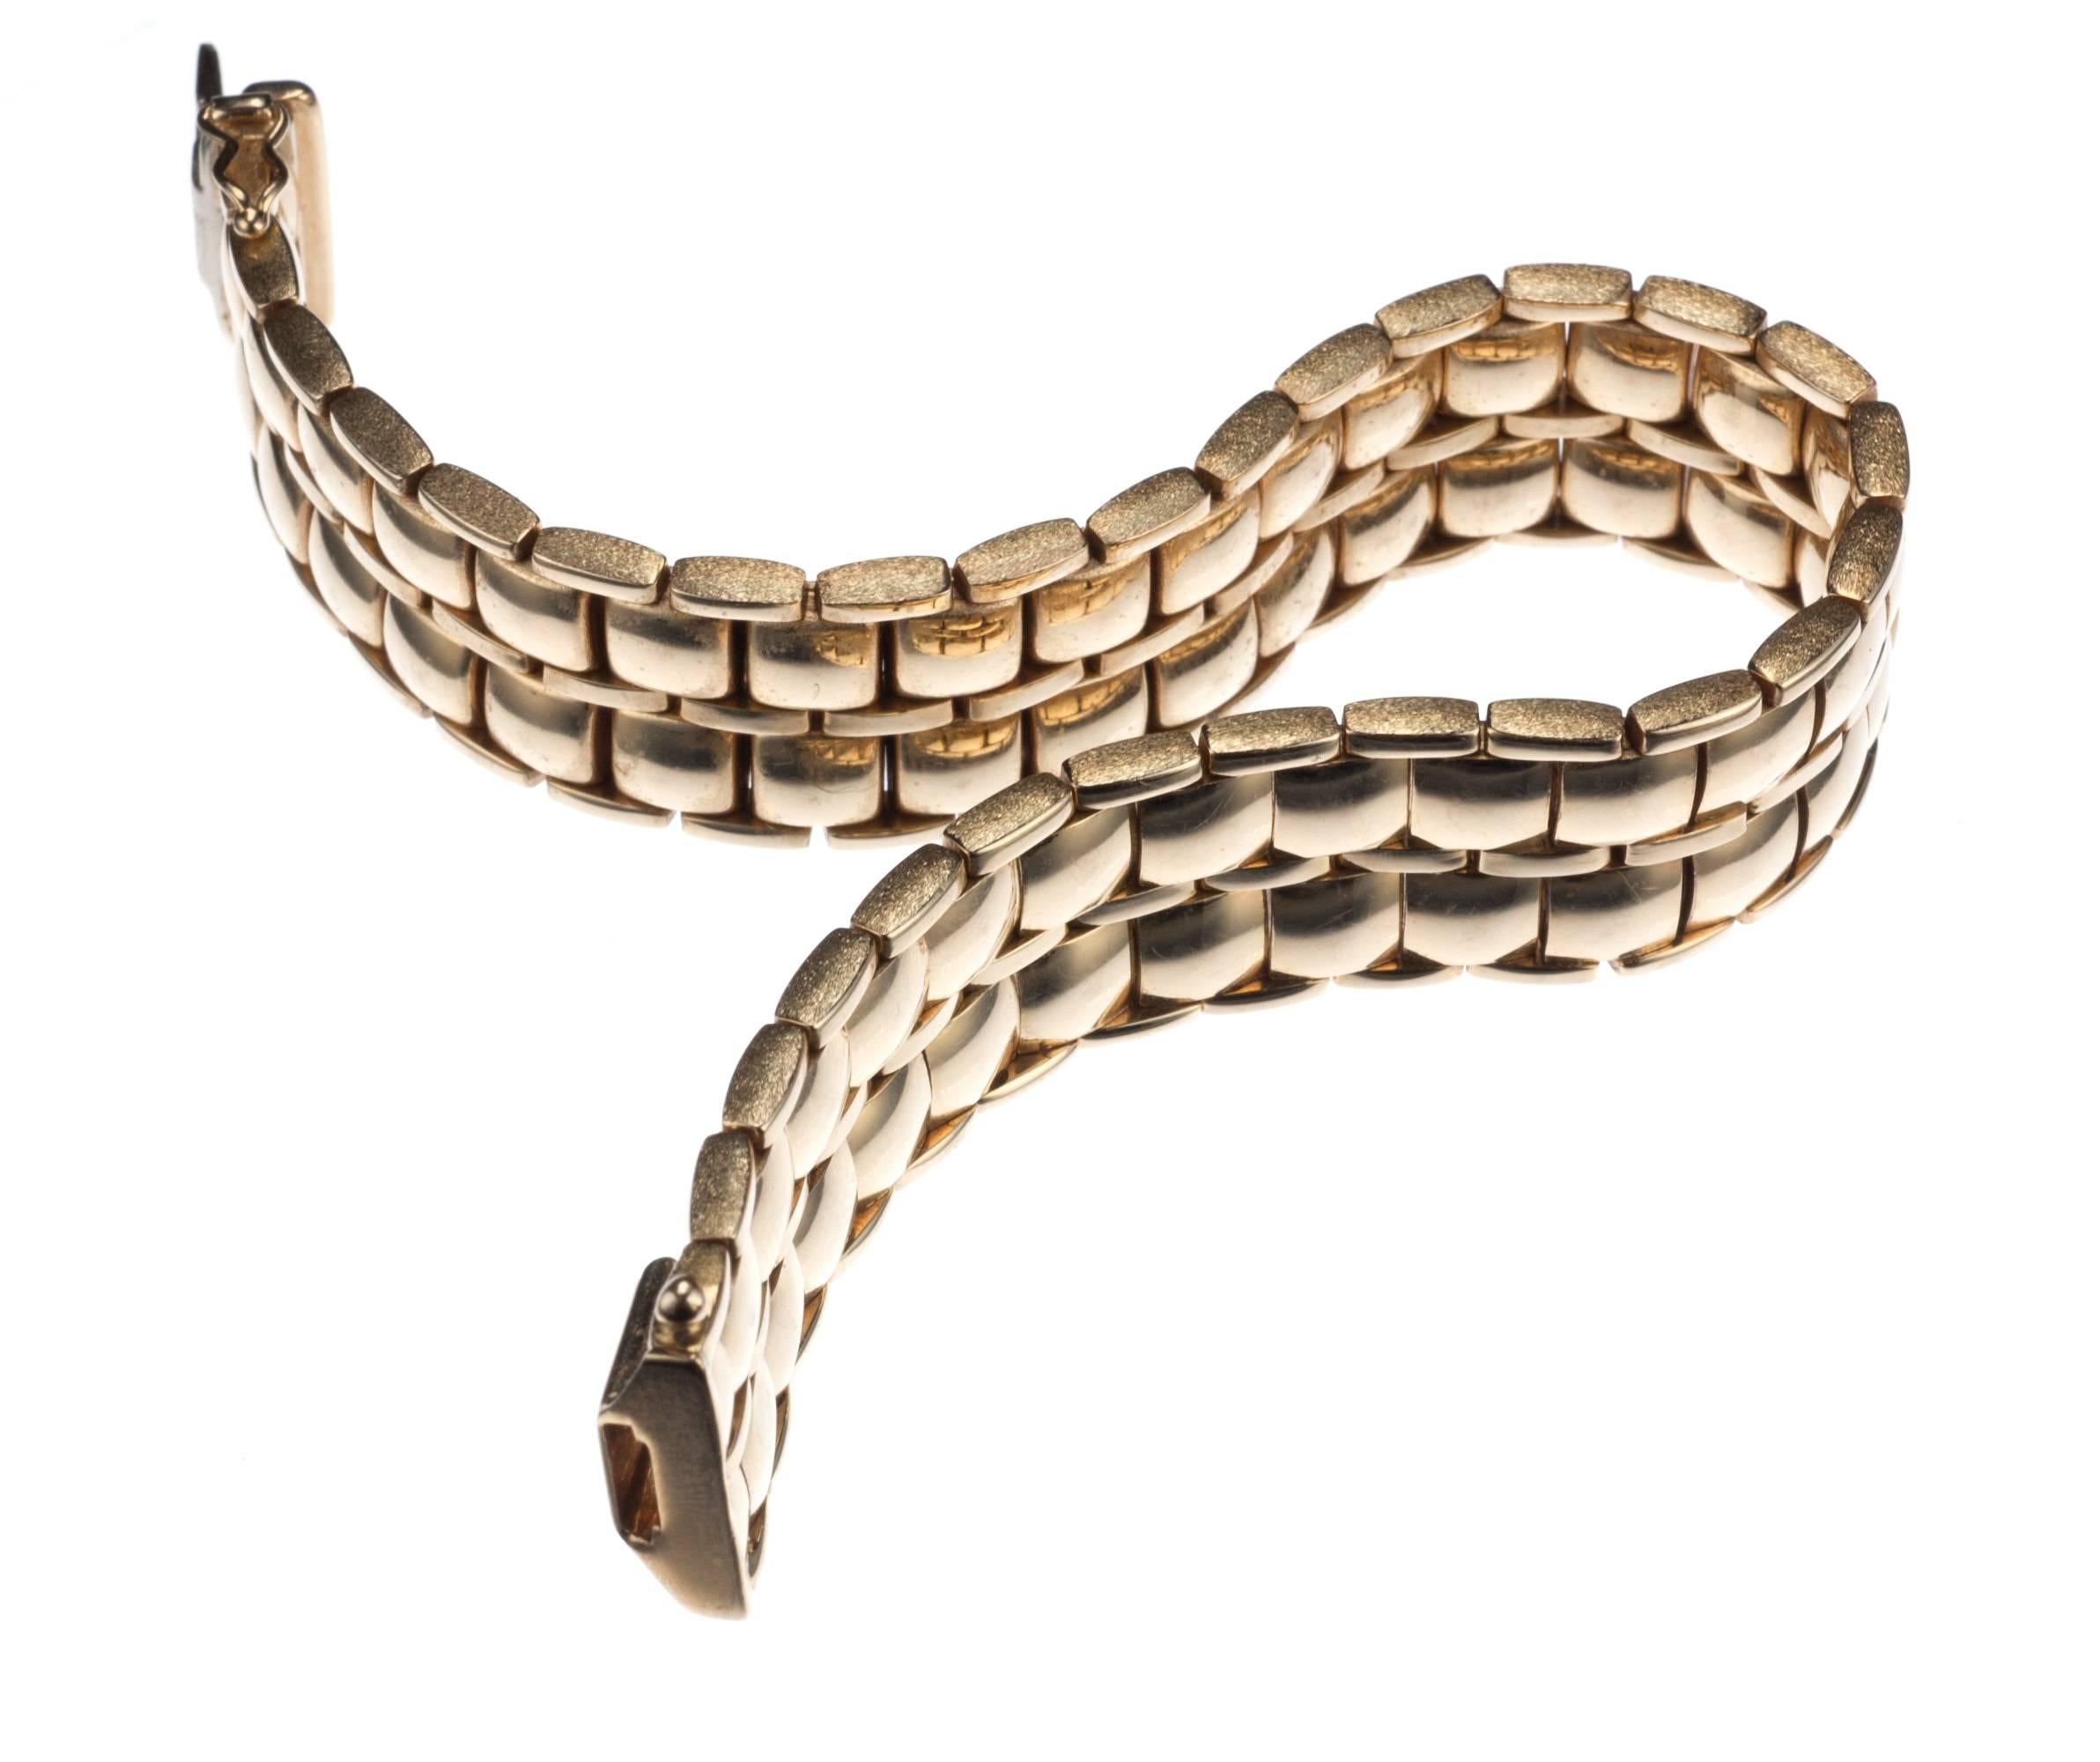 At home in any jewelry collection, a classic tile-link bracelet in 14-karat yellow gold. The outermost edge of the bracelet has a matte-finish, a subtle accent that fits naturally with such a demure bracelet. Clasp includes figure-8 safety. Bracelet